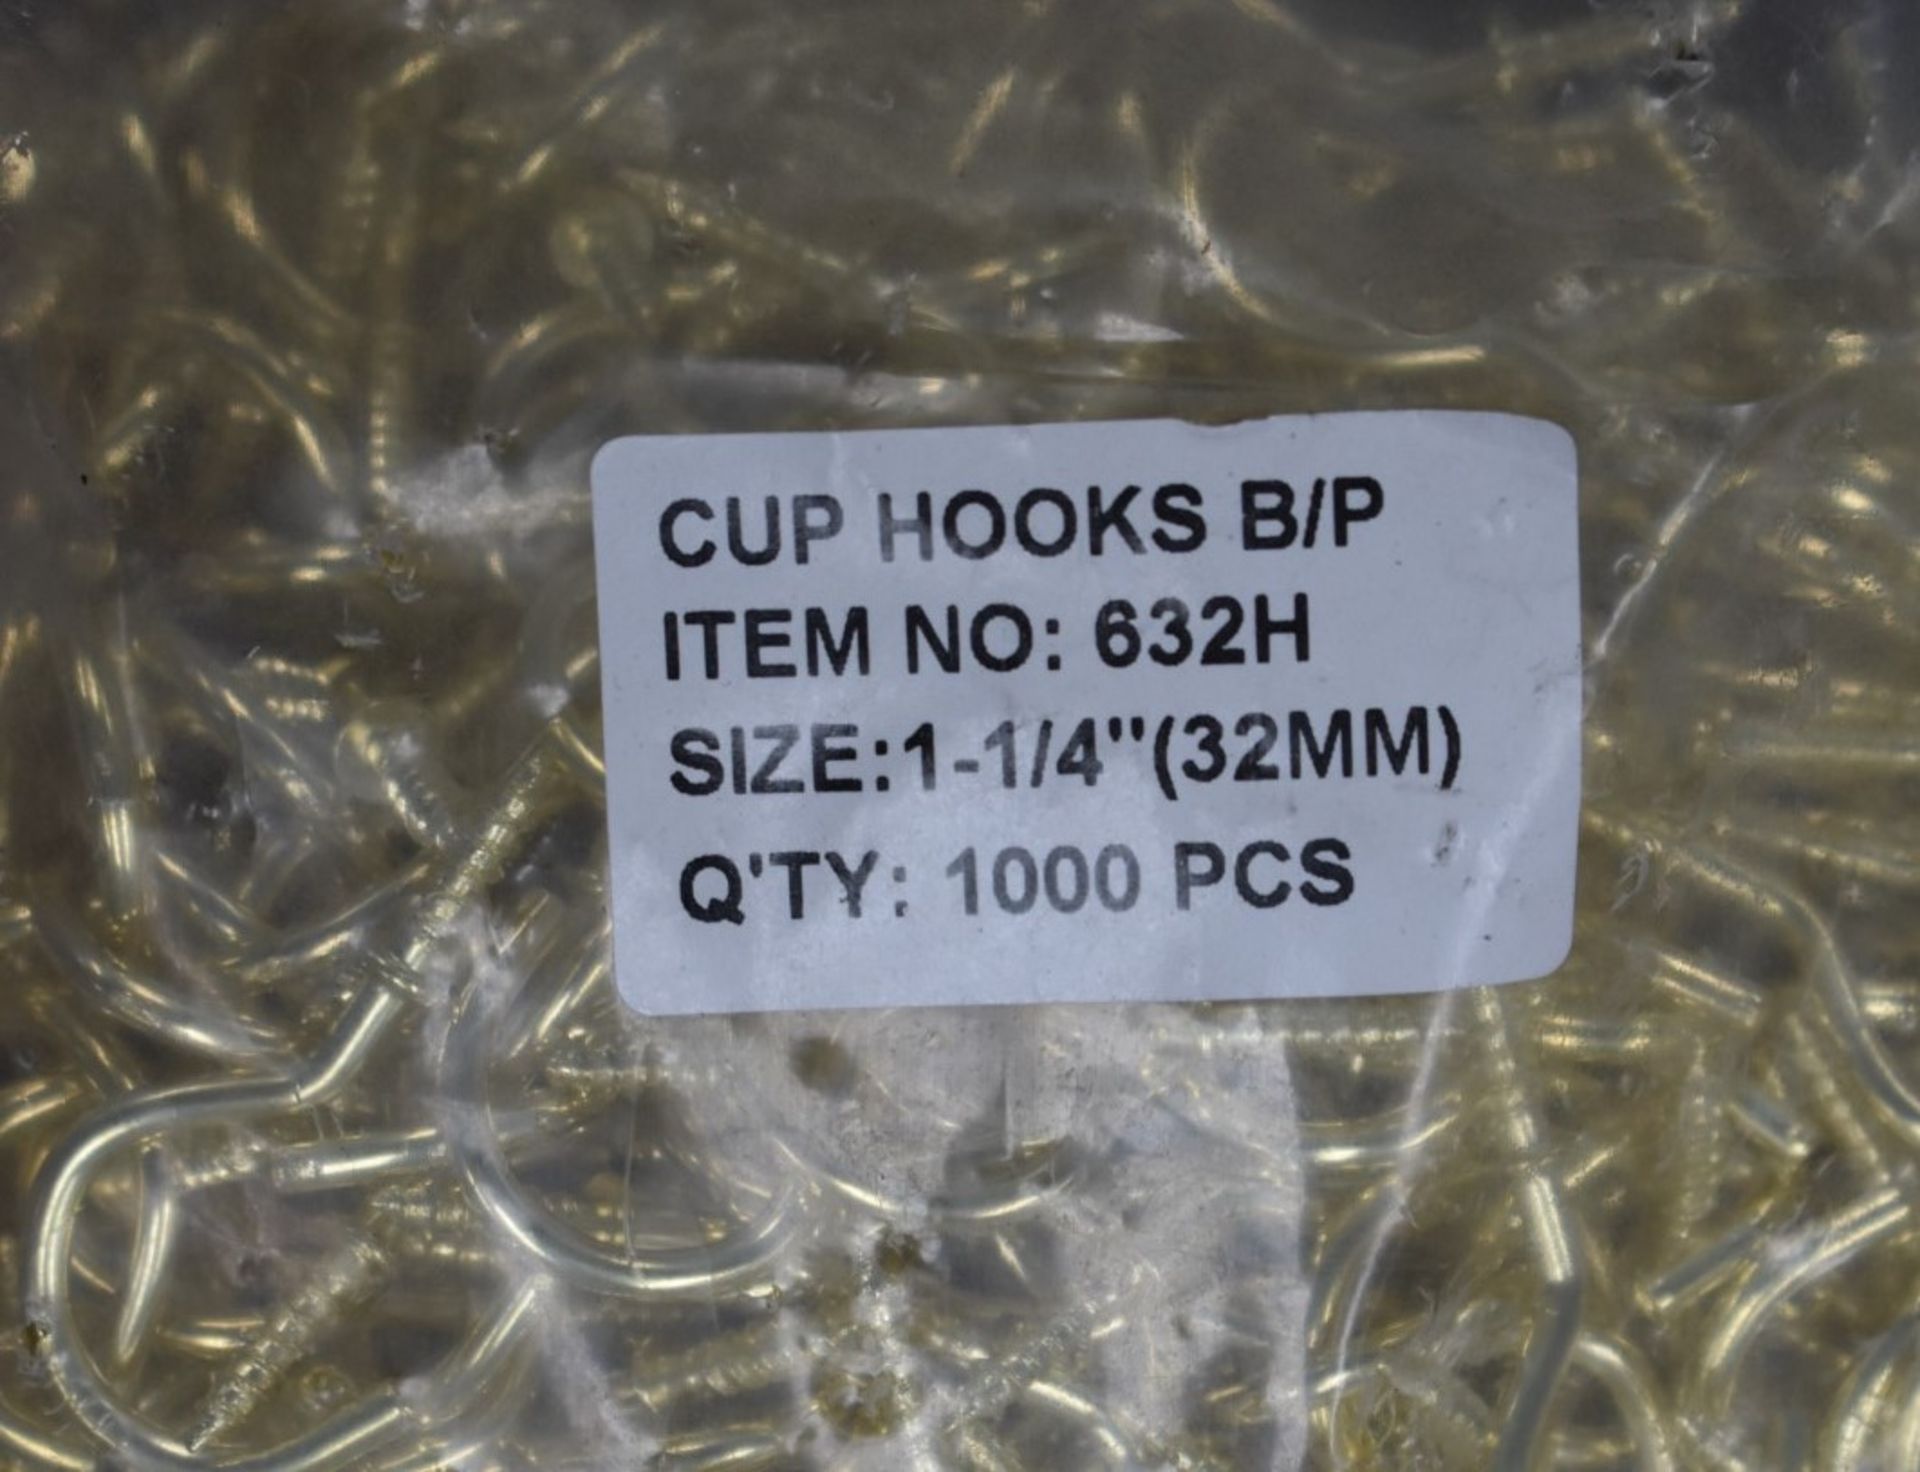 1,000 x Brass Plated Cup Screw Hooks - Product Code 632H - Size 1-1/4" 32mm - Supplied in 1 Bag of - Image 2 of 4